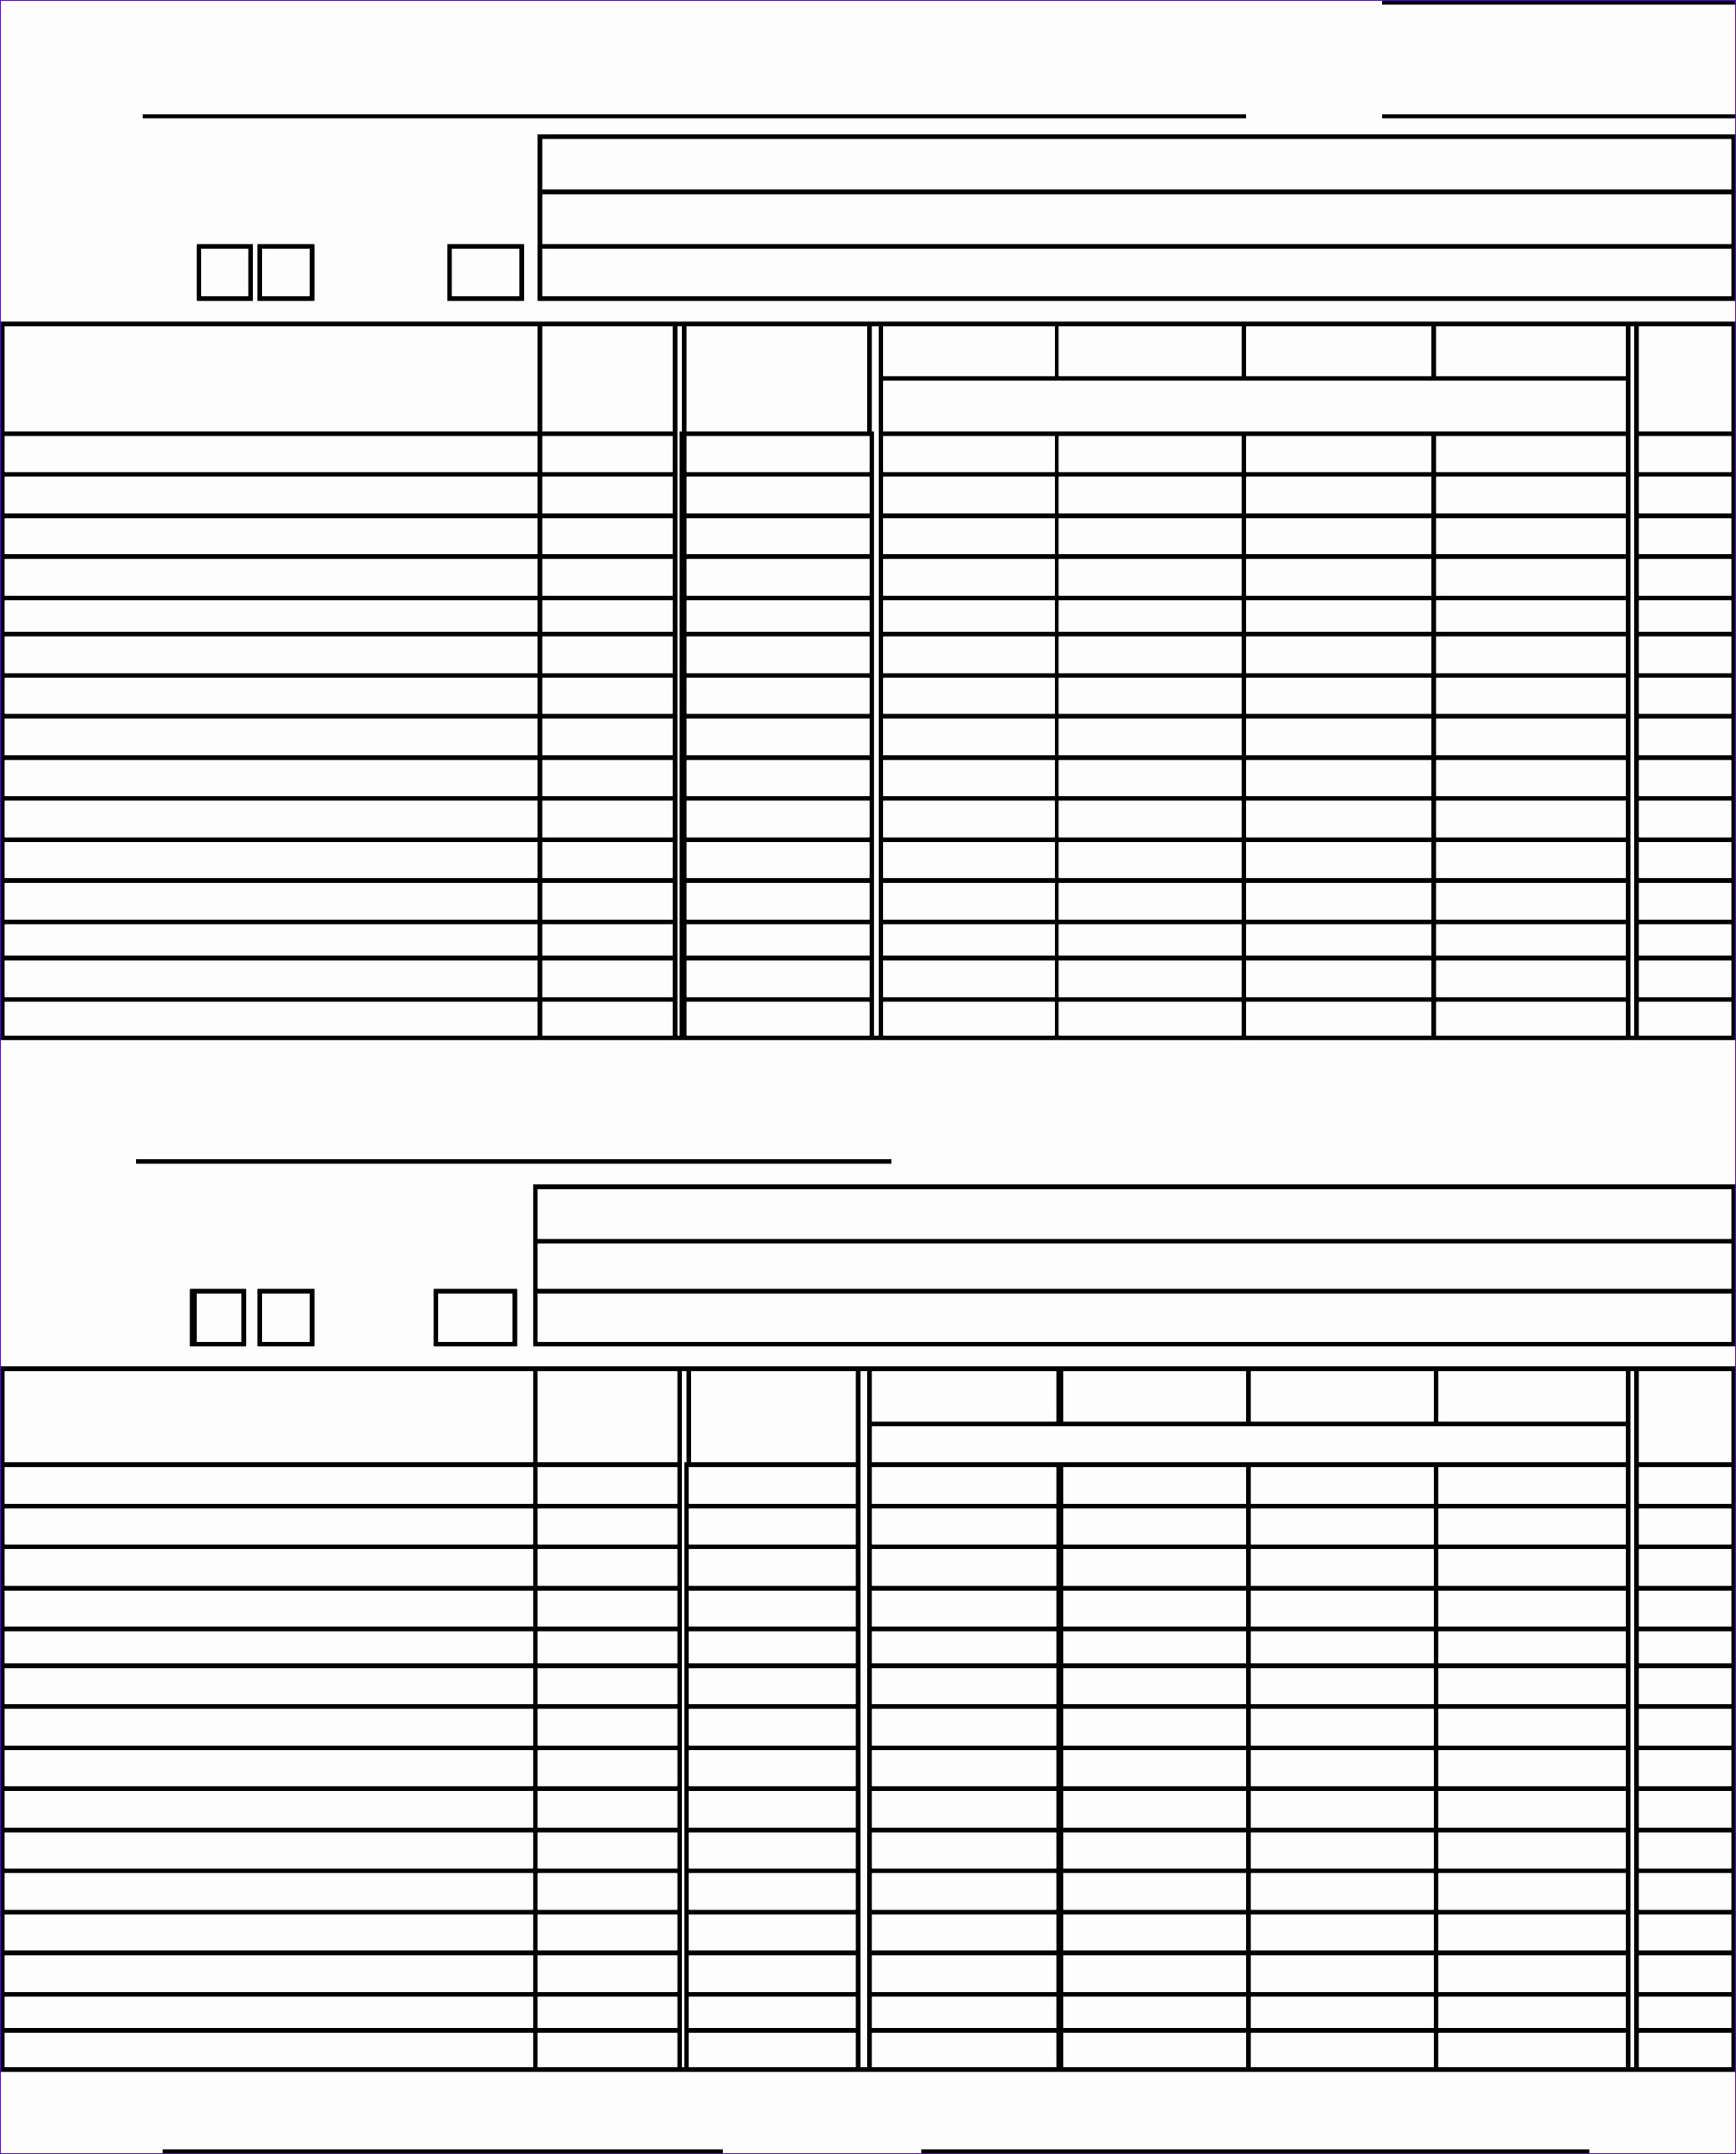 7-basketball-score-sheet-template-excel-excel-templates